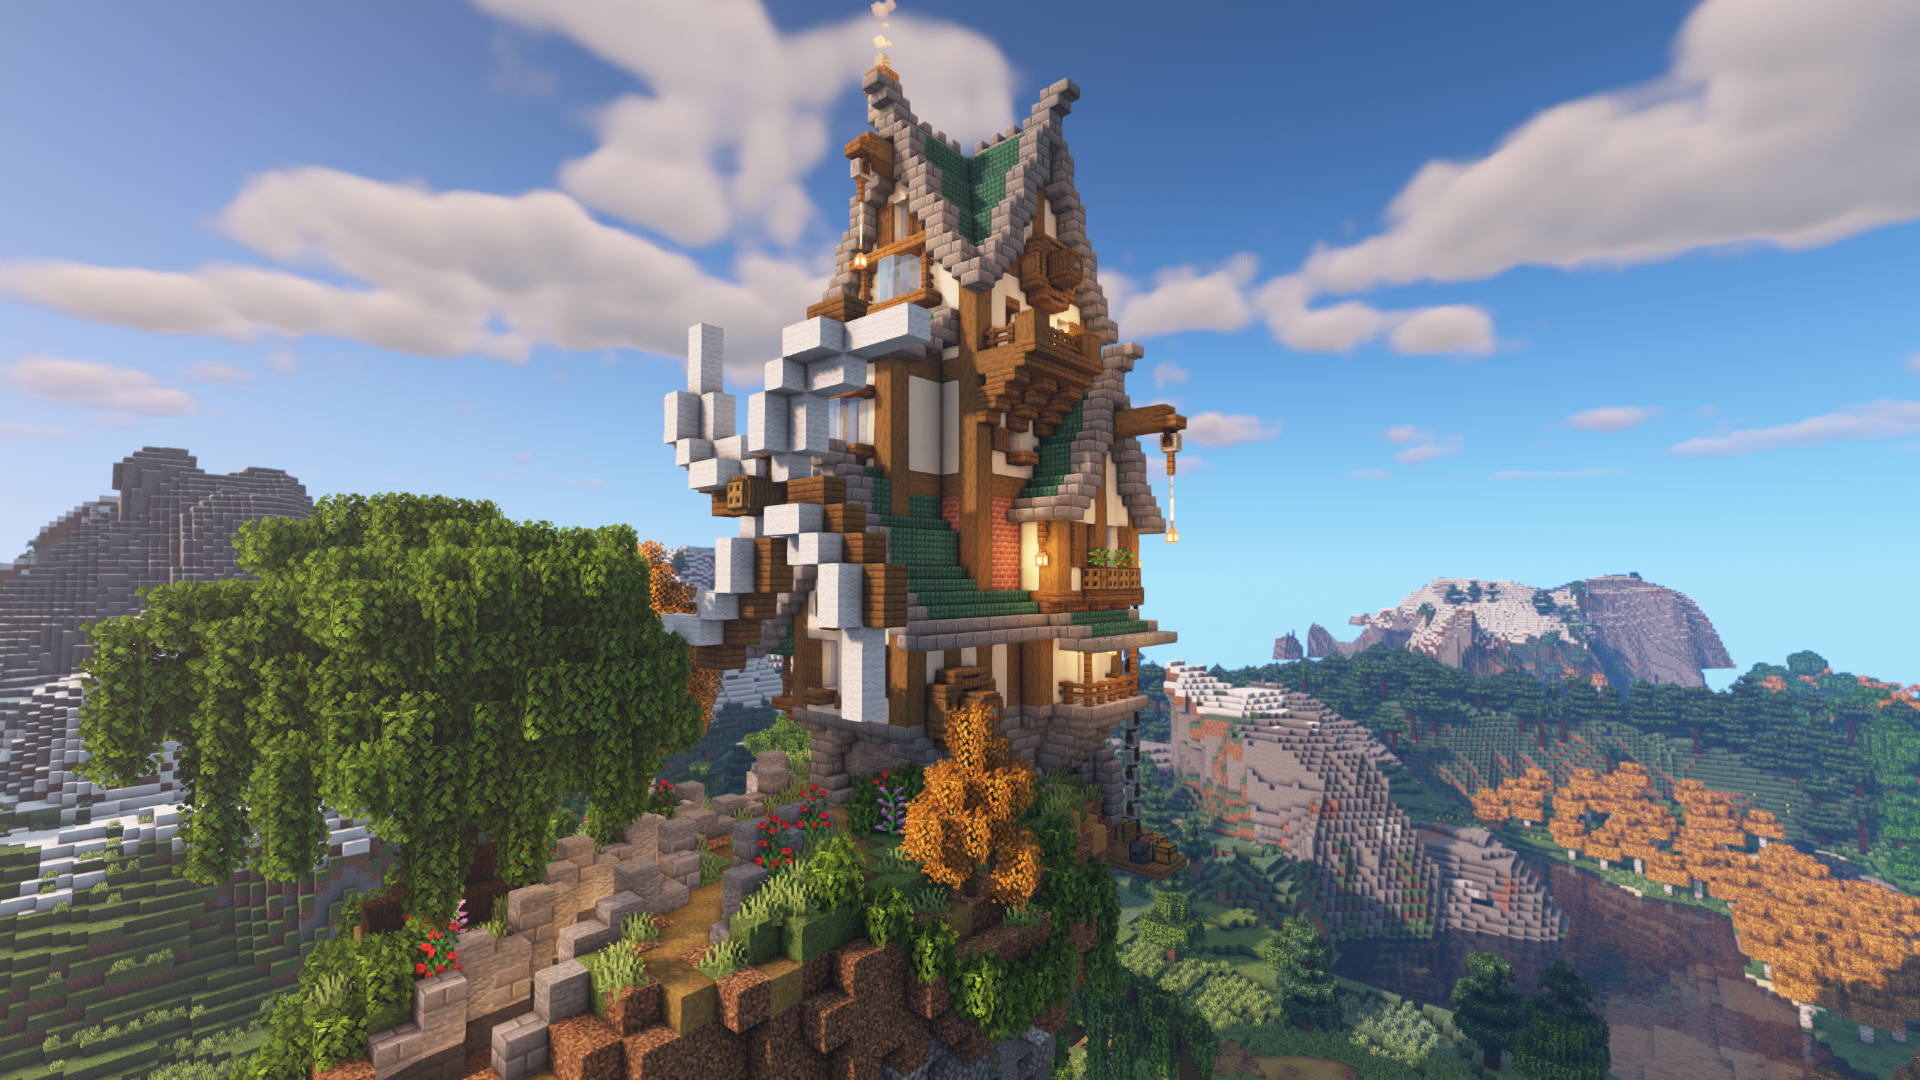 Minecraft Timelapse | Epic Steampunk House on a Floating Island